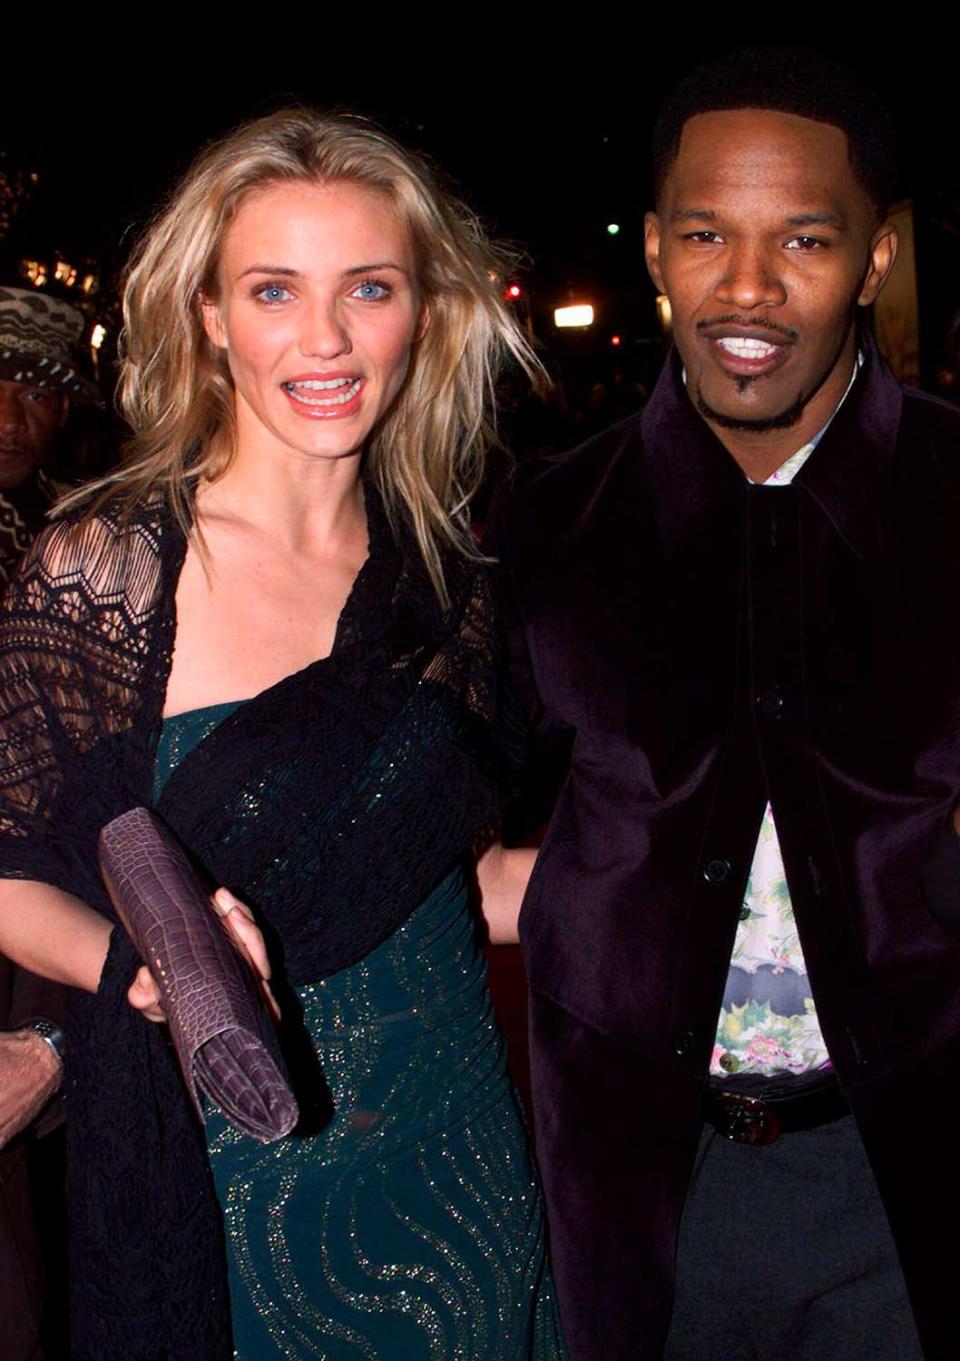 1999--Actors Cameron Diaz and Jamie Foxx, stars of the new film by director Oliver Stone, Any Given Sunday pose at the film's premiere December 16 in Los Angeles. Diaz portrays football team owner Christina Pagniacci and Foxx portrays Willie Beaman, a third-string quarterback in the film about the world of professional football, which also stars Al Pacino and Dennis Quaid. FSP